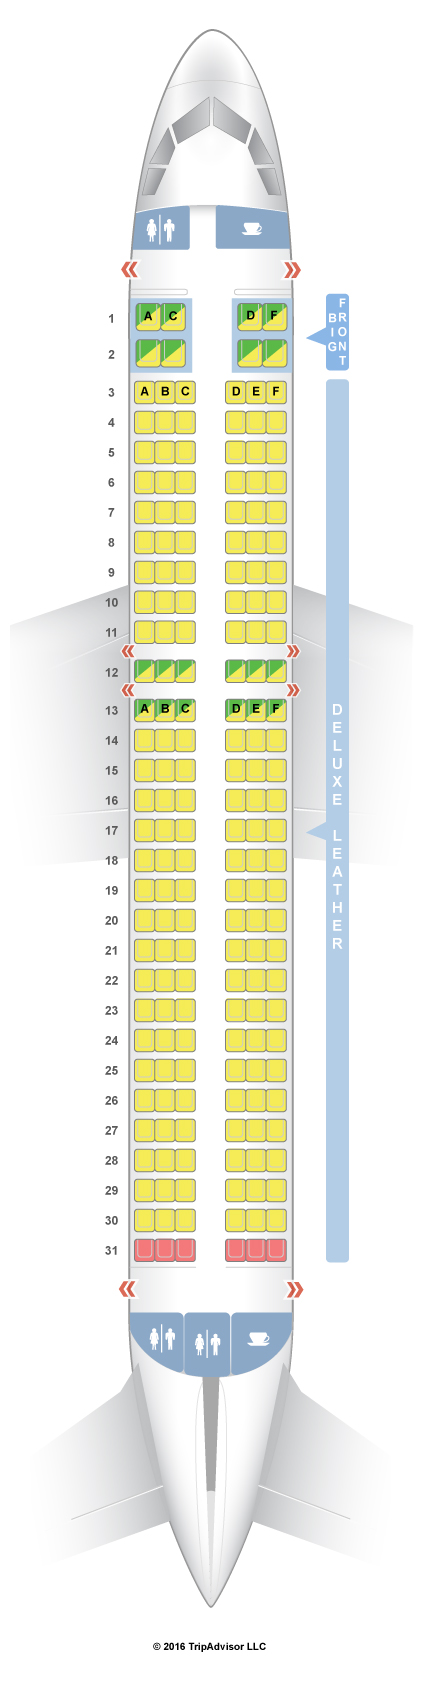 Us Airways A320 Seating Chart